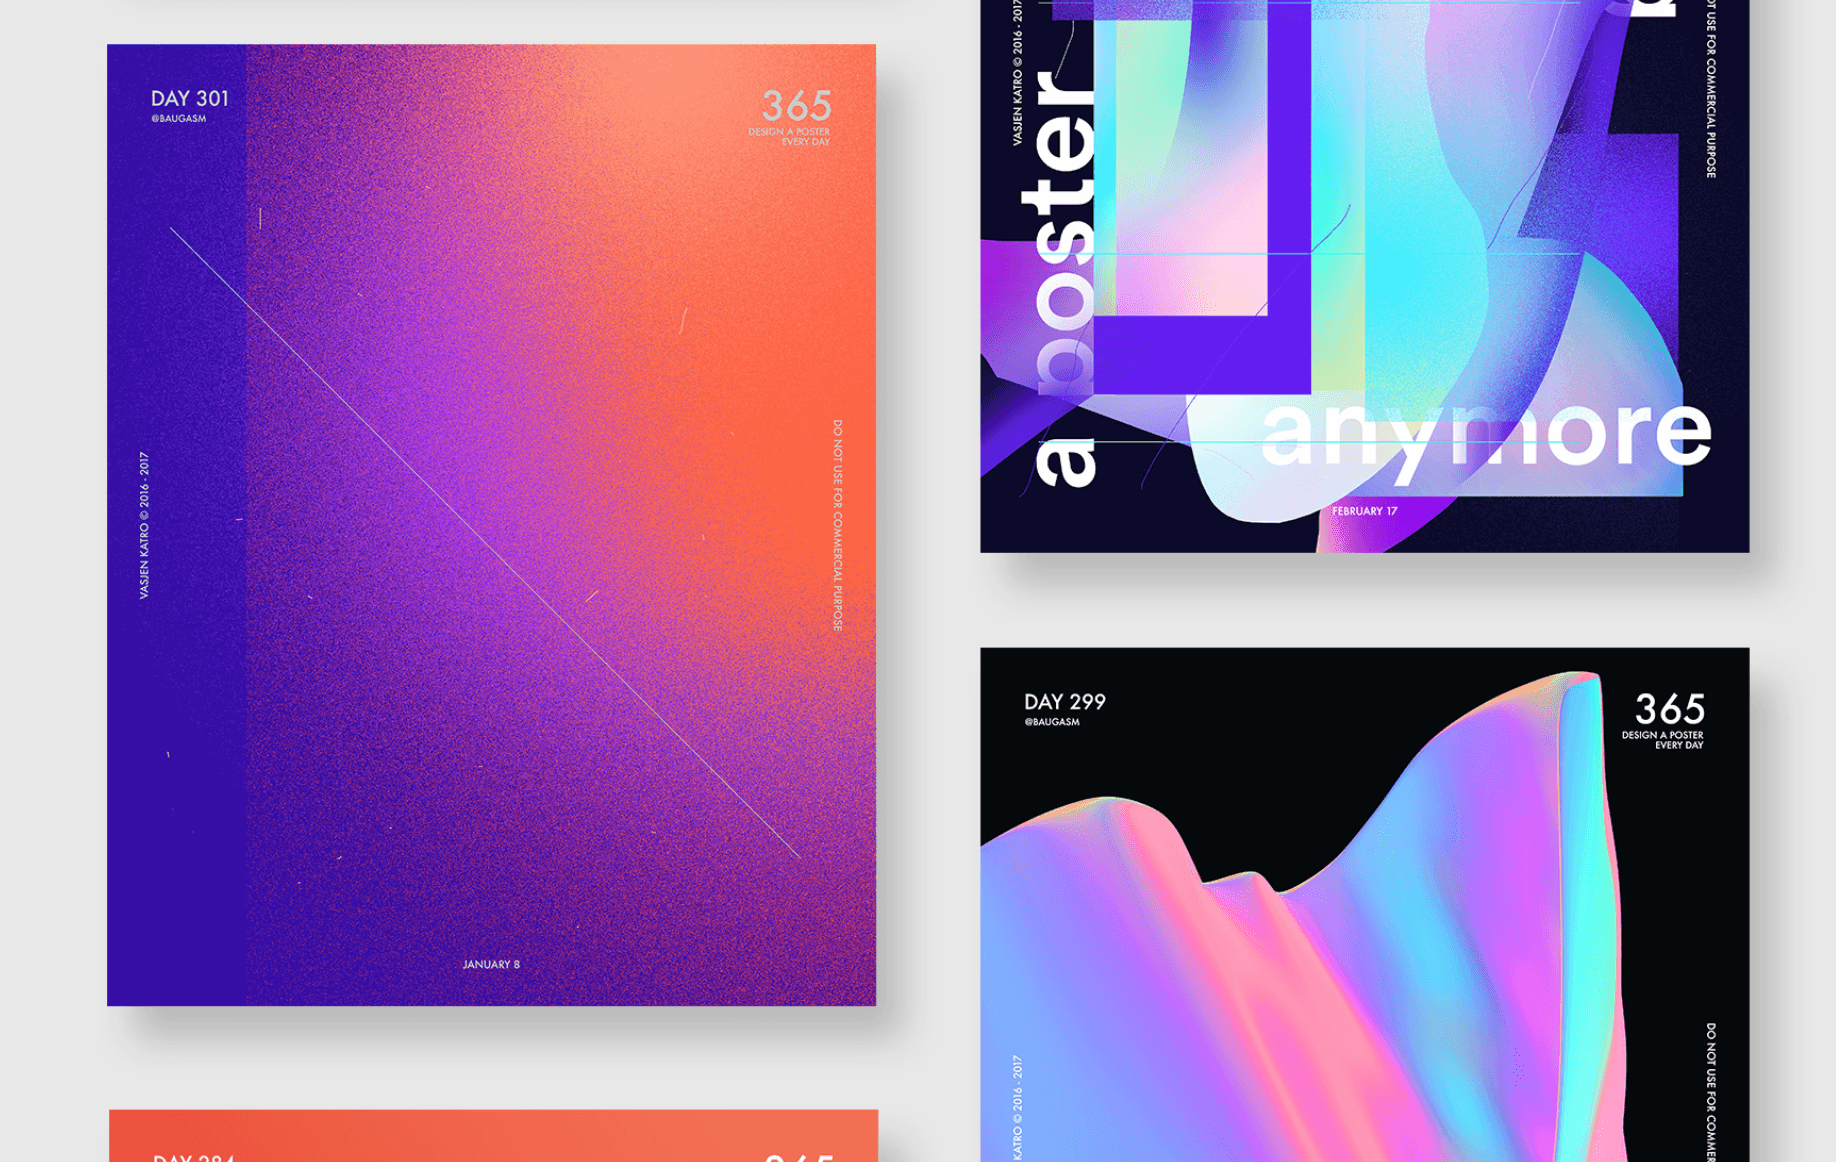 Posters displaying graphics that include textured gradients.